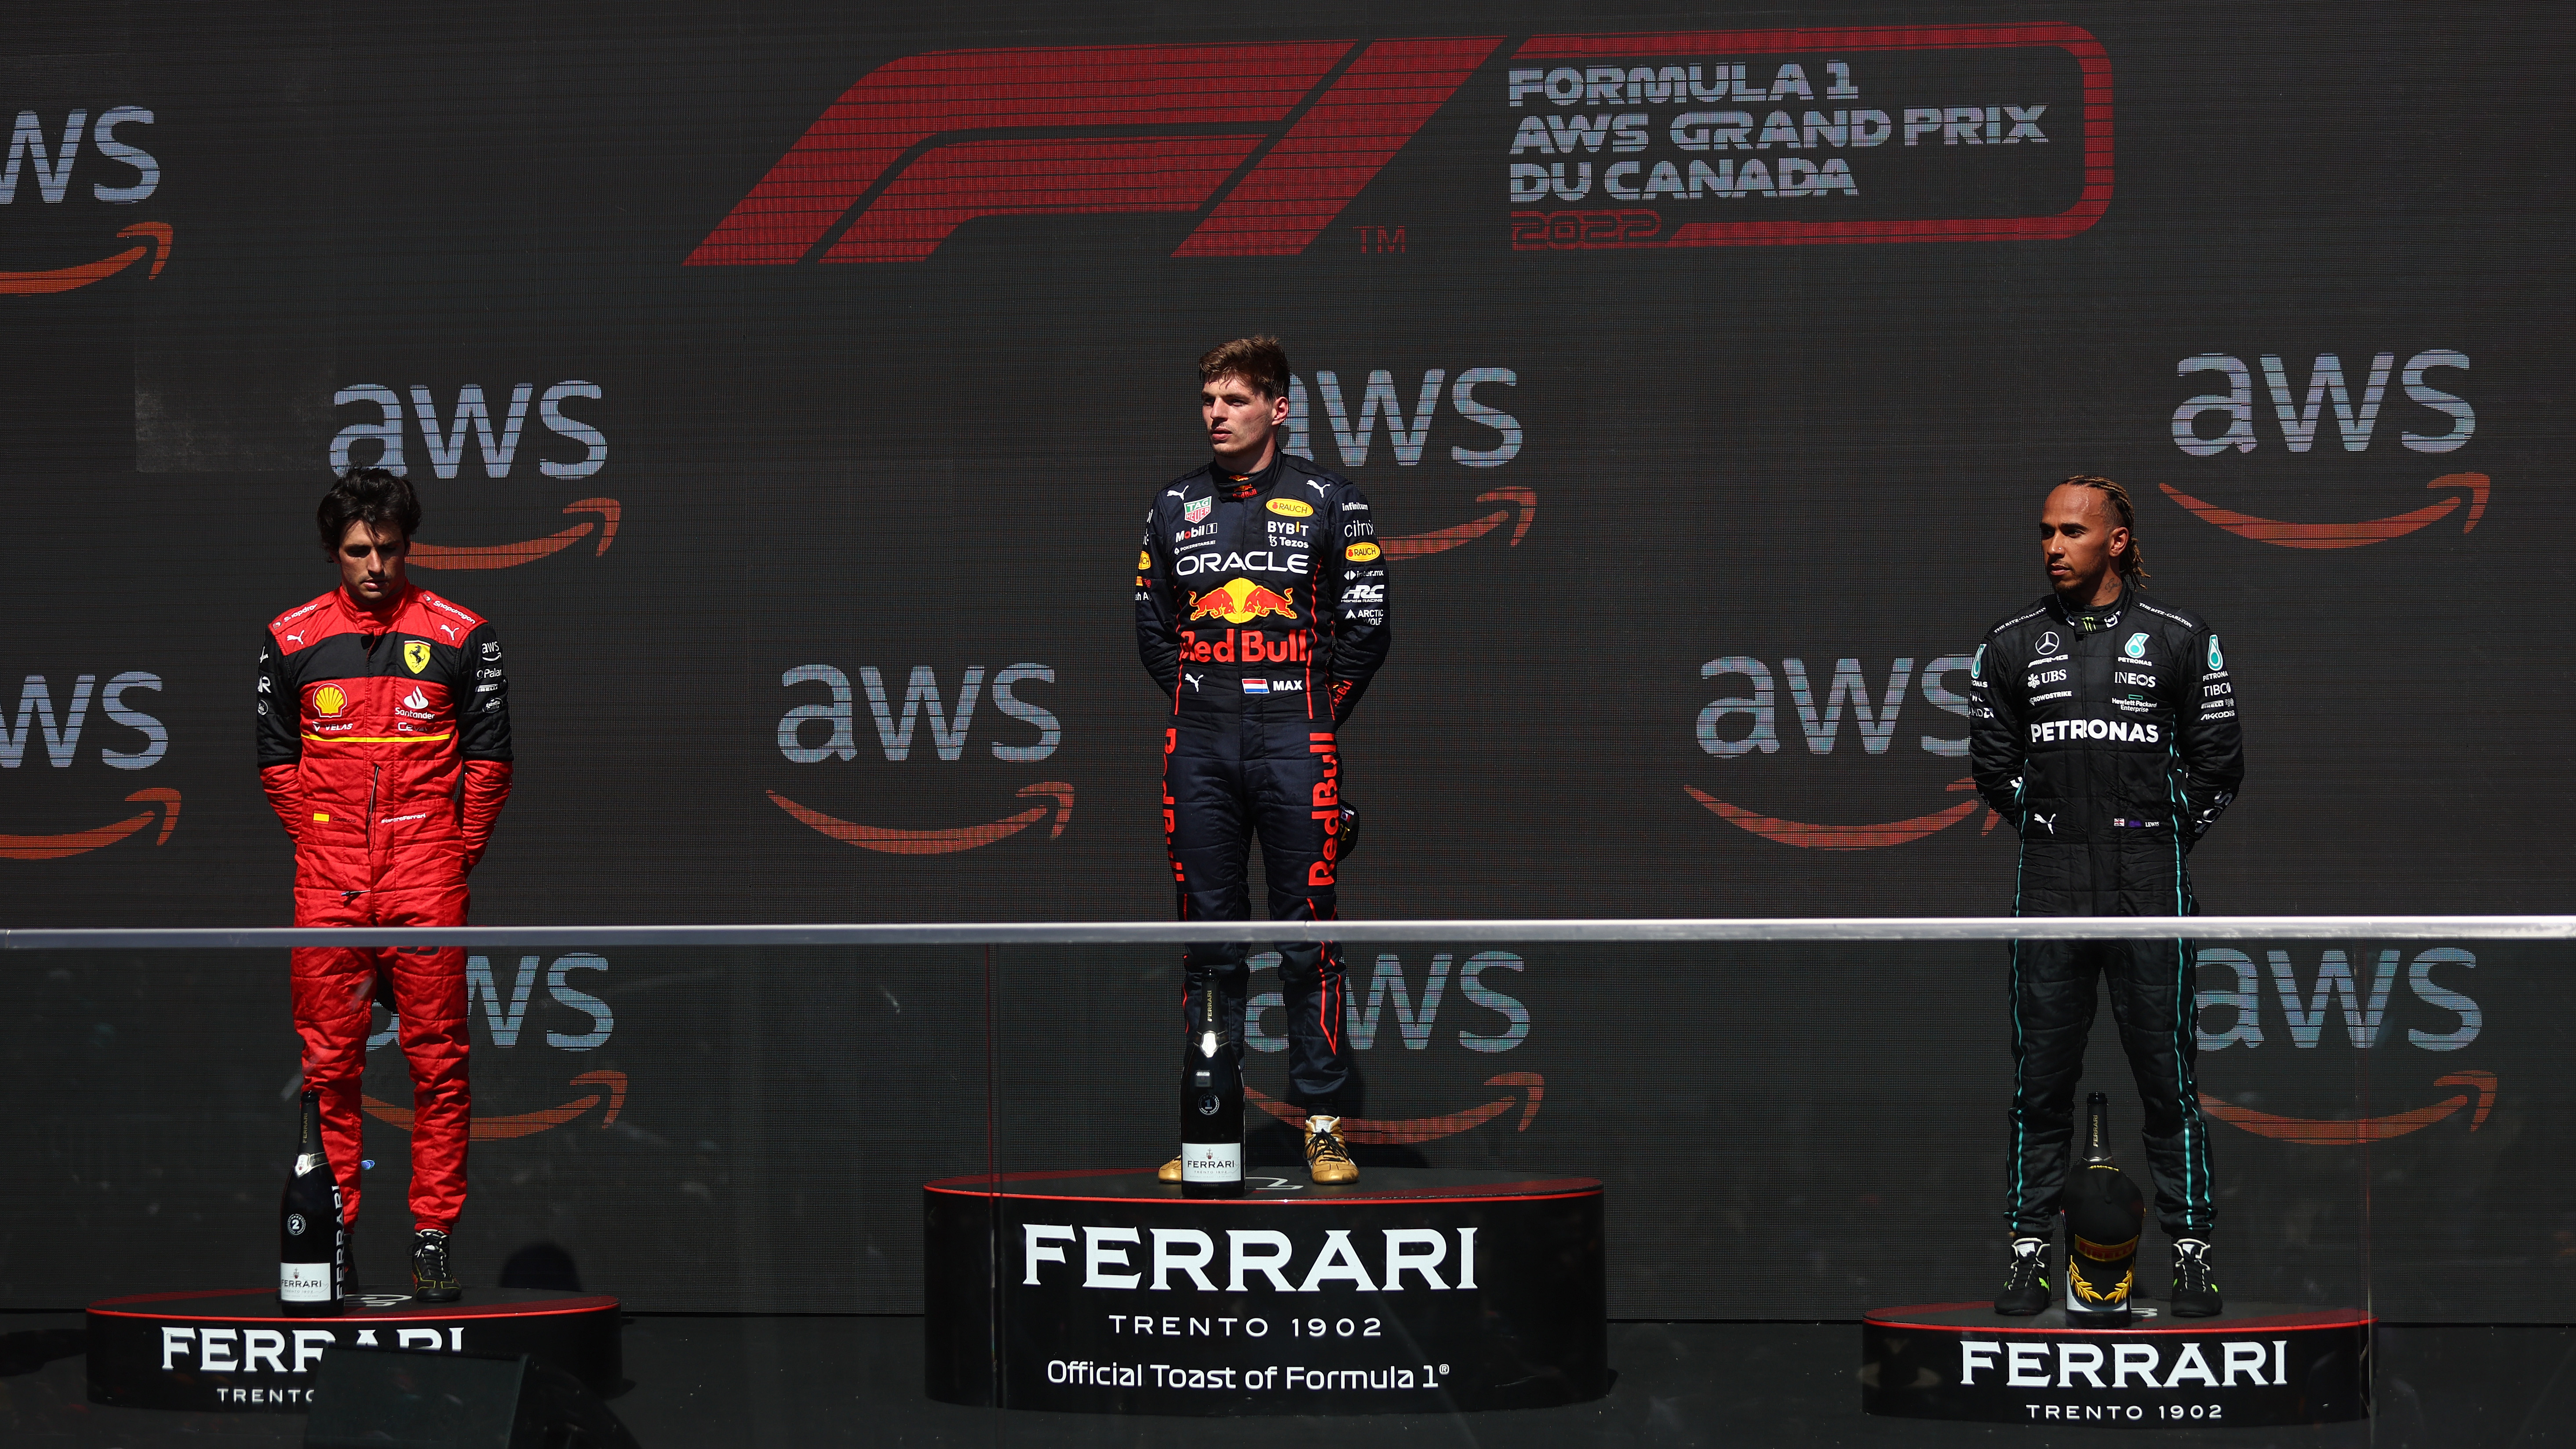 Race winner Max Verstappen second placed Carlos Sainz and third placed Lewis Hamilton make up the Canadian Grand Prix podium.